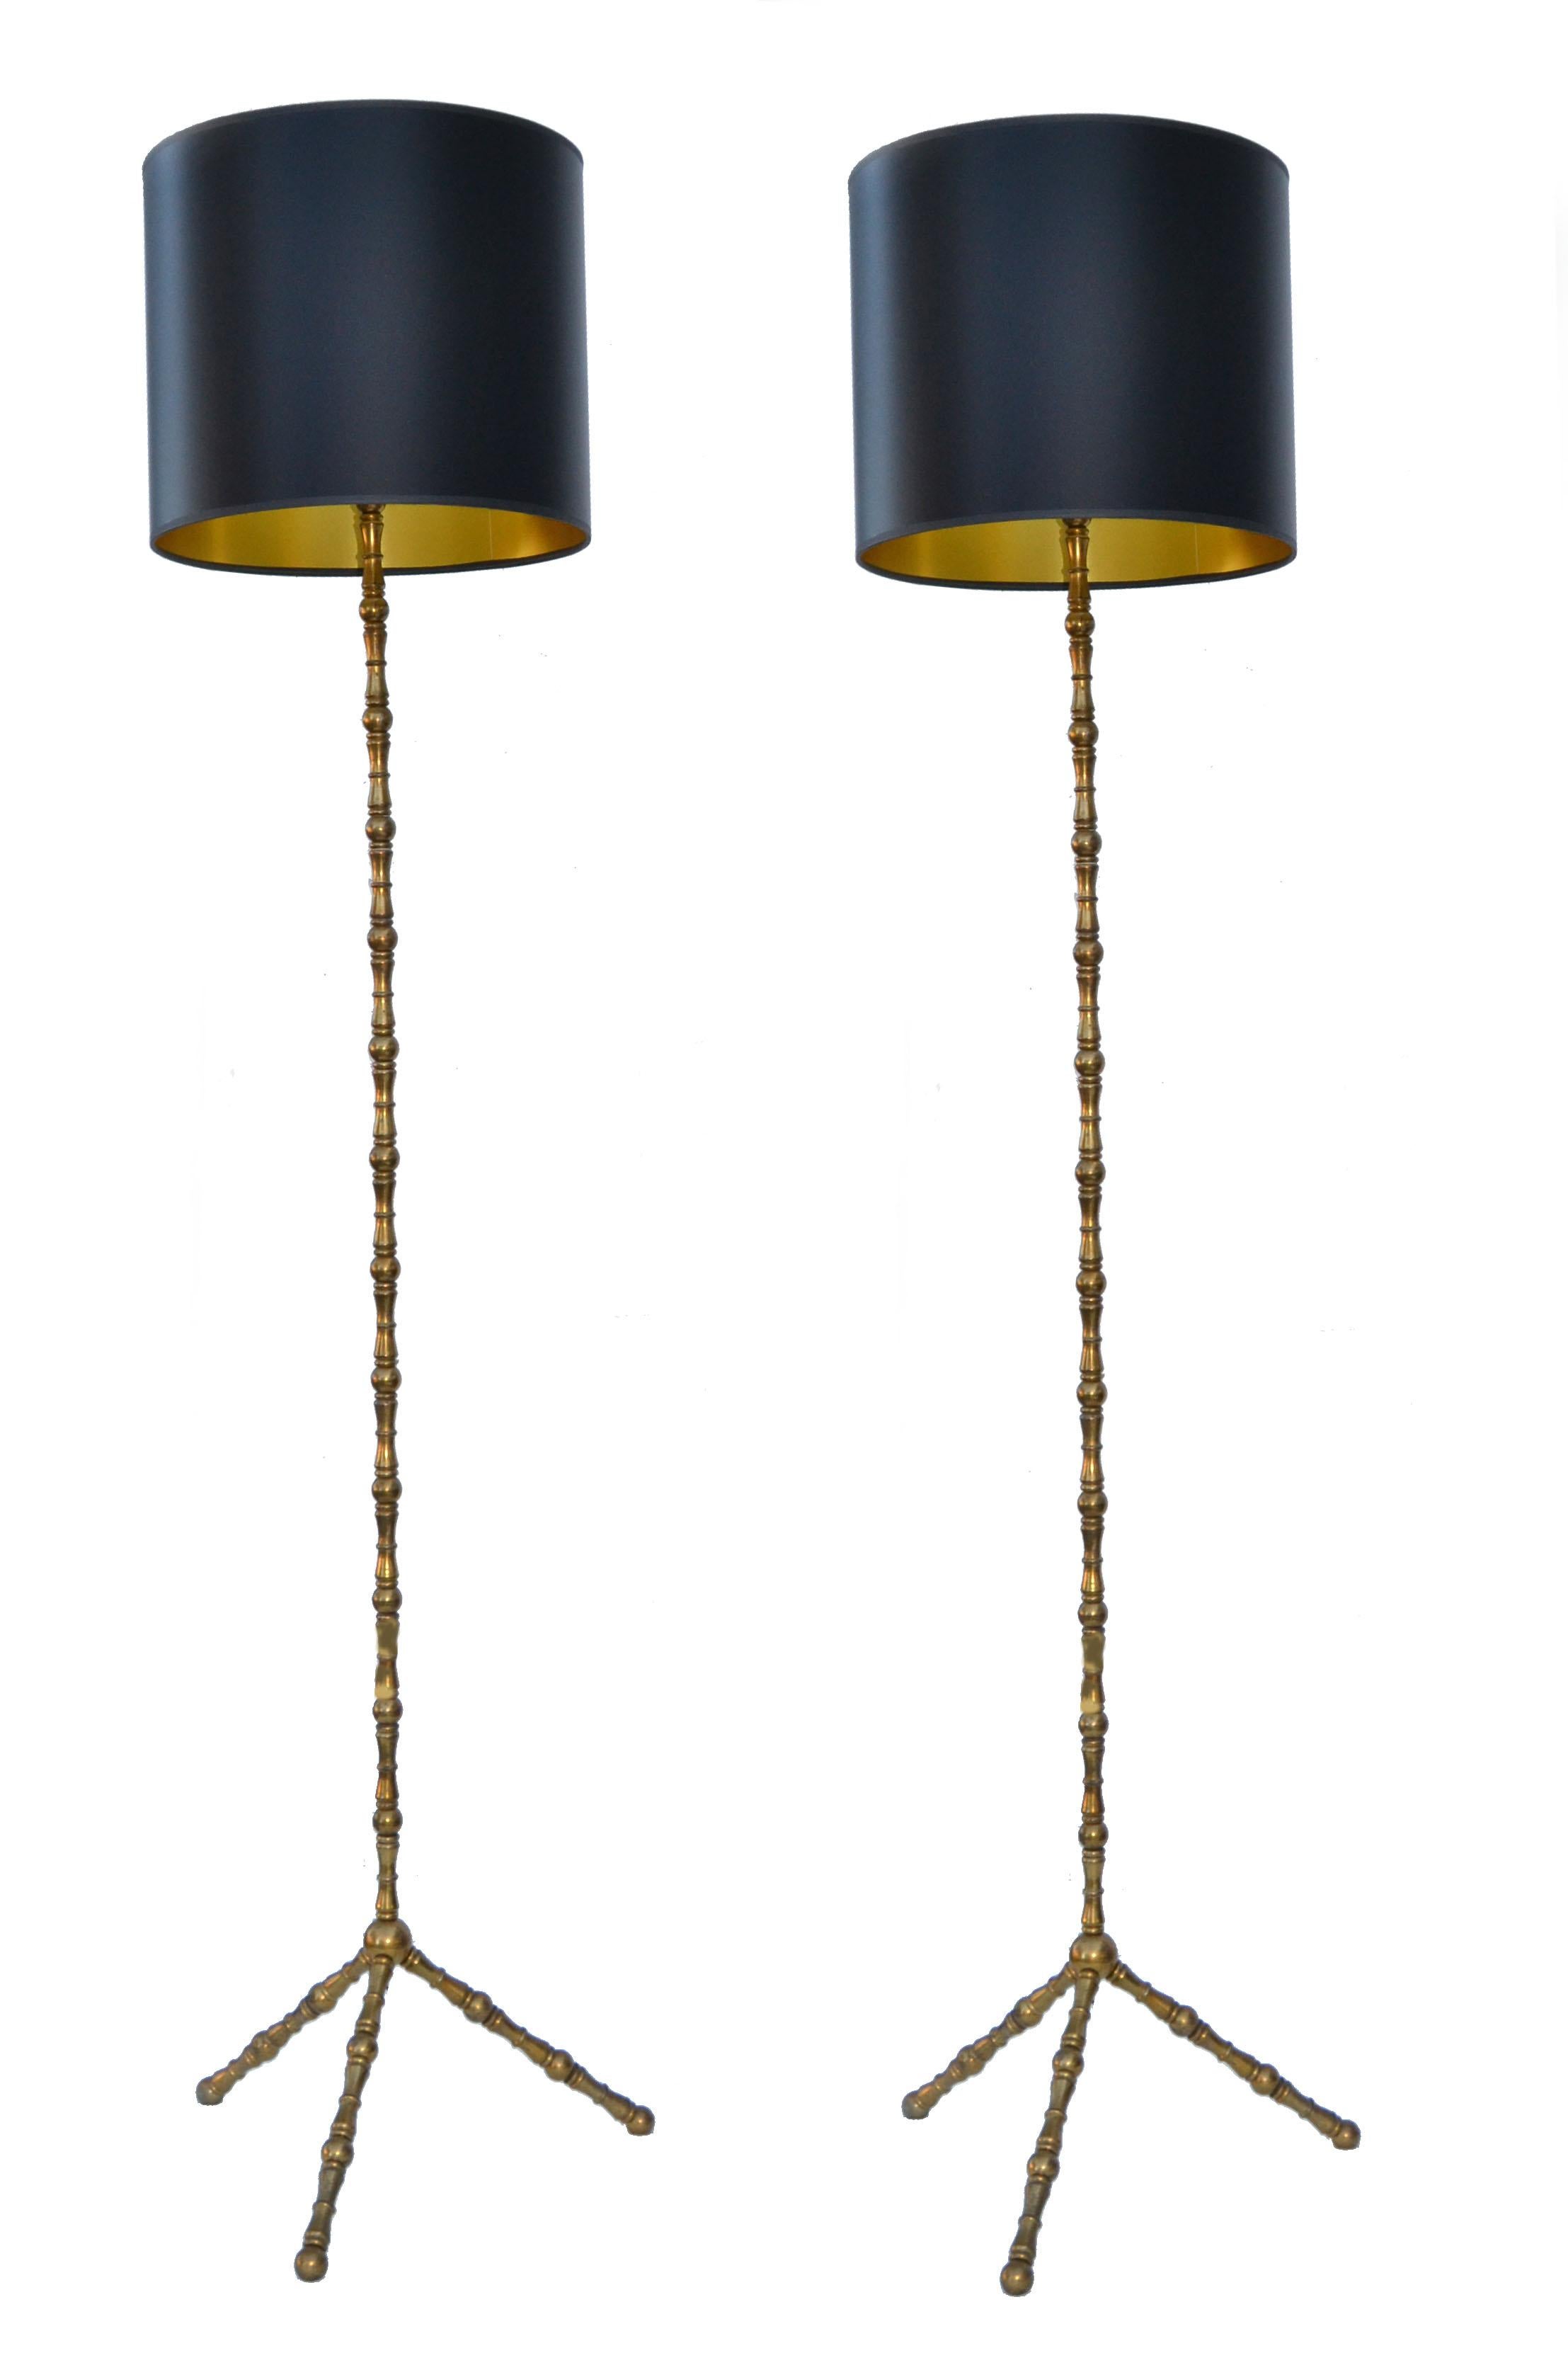 Pair of neoclassical Maison Baguès bronze and brass bamboo style floor lamp made in France in the 1950s.
Wired for the US and each floor lamp takes a regular or LED bulb.
Classic and elegant as well as practical.
Black & Gold Paper-shade